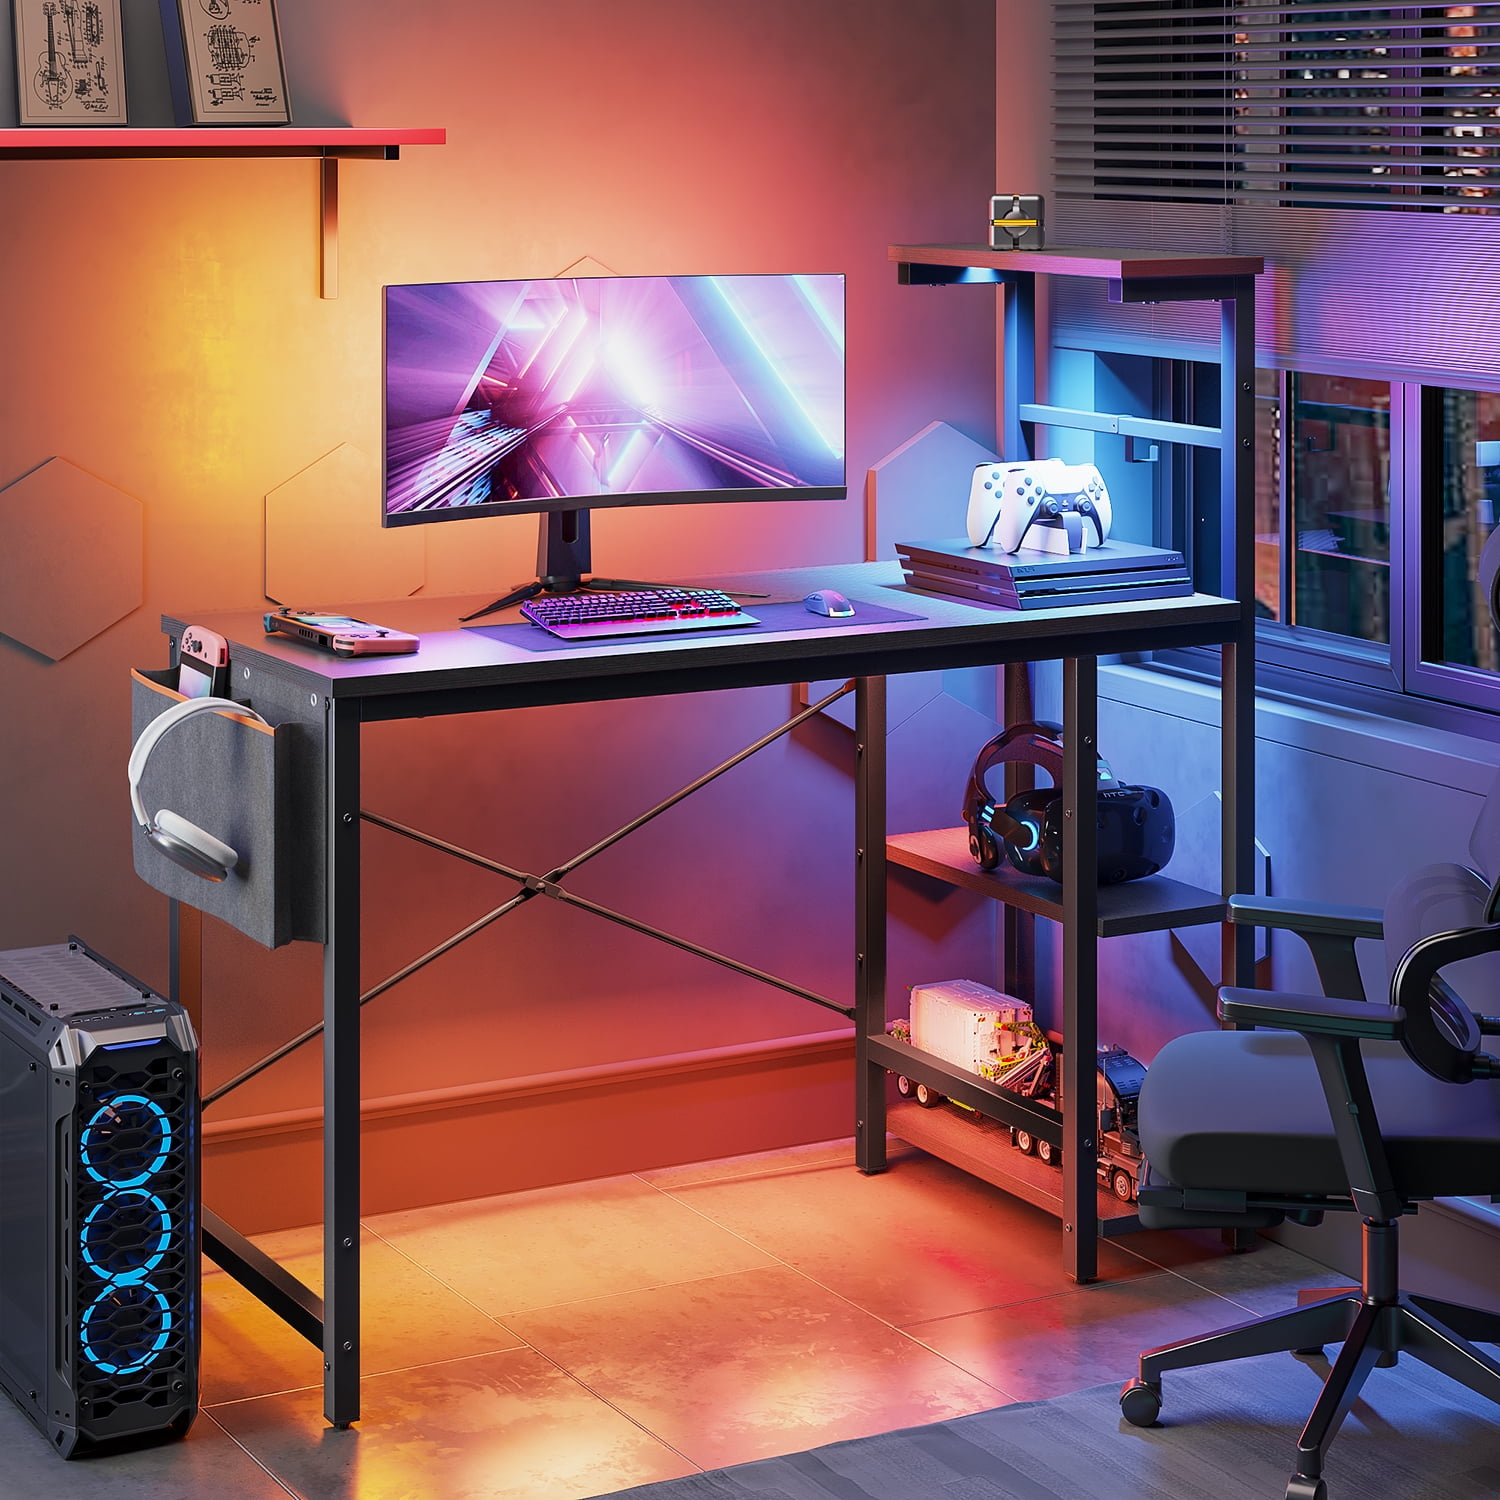 Bestier Reversible 44 inch Computer Desk with LED Lights Gaming Desk with 4 Tier Shelves Black - image 1 of 9